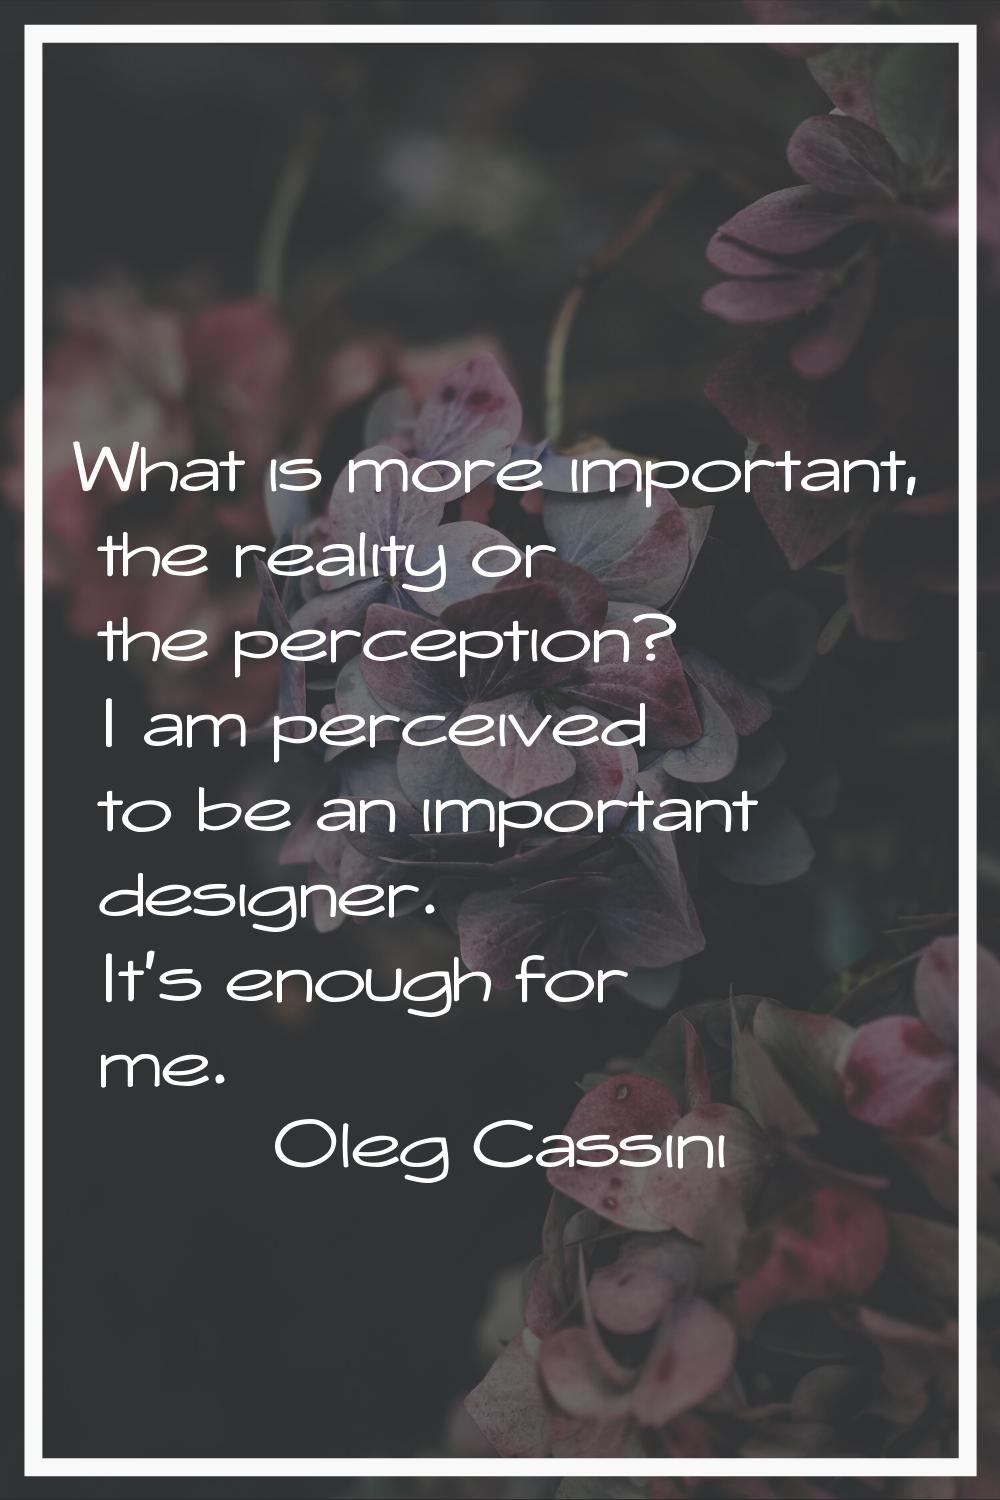 What is more important, the reality or the perception? I am perceived to be an important designer. 